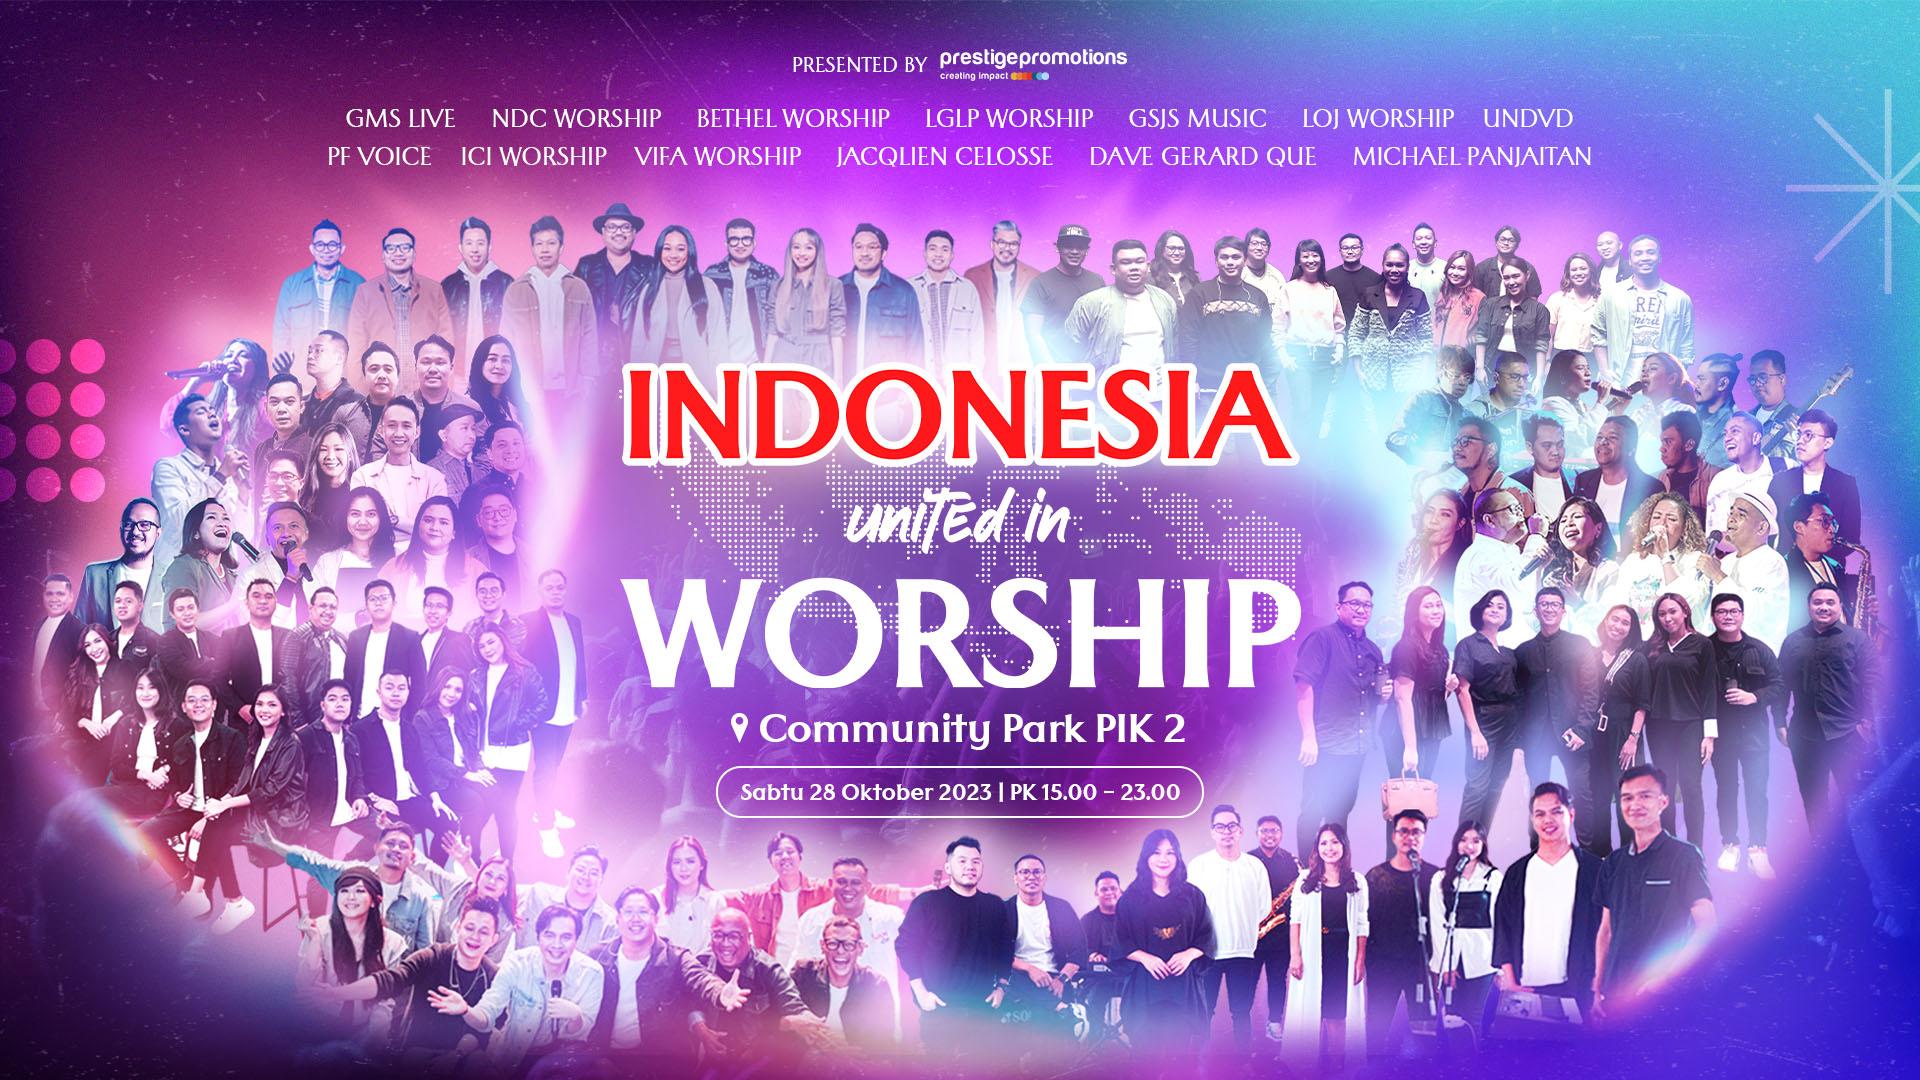 Indonesia United in Worship